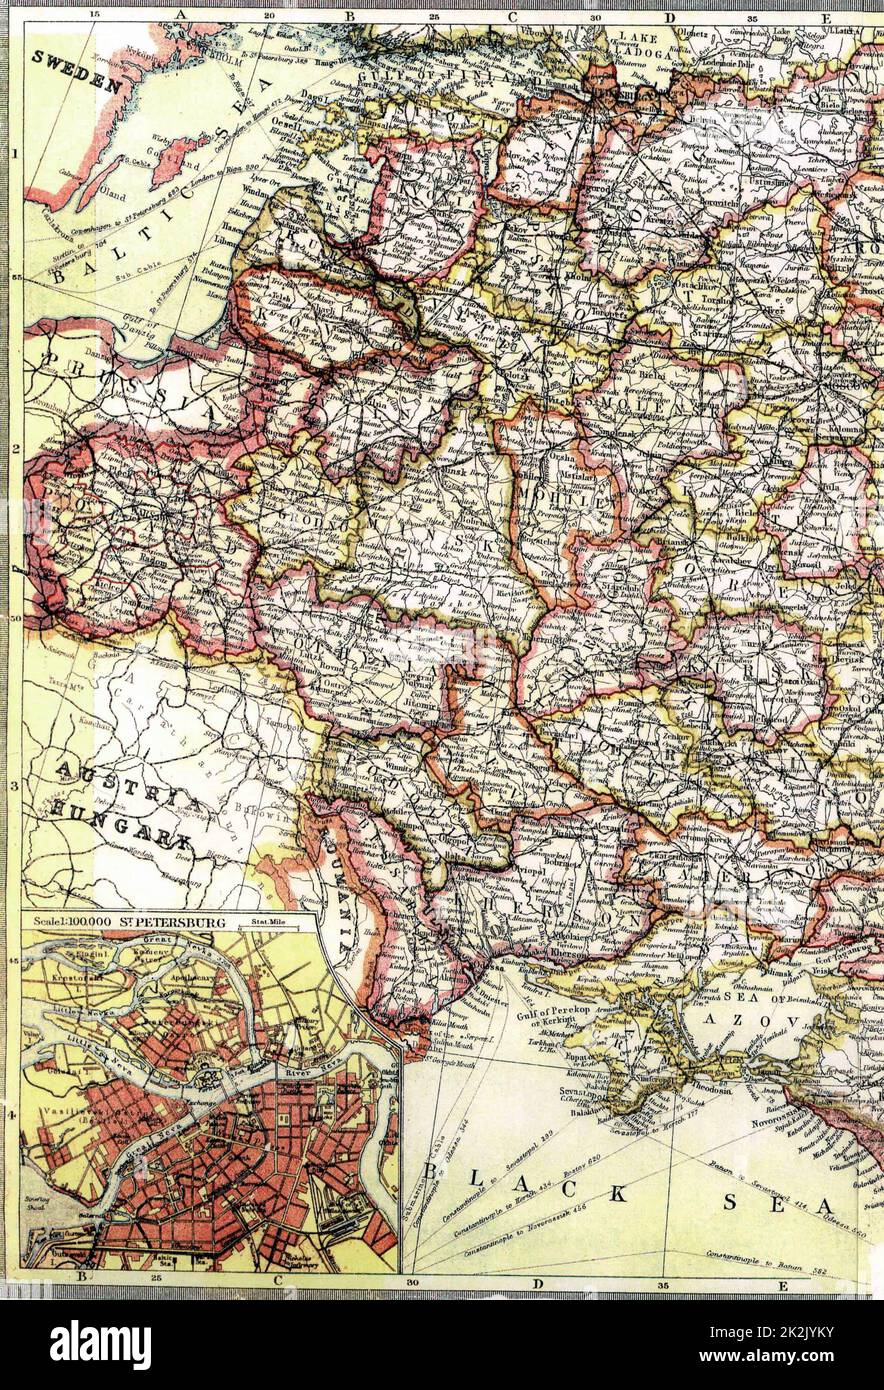 Industrialisation in Russia was led by the introduction of railways. Map circa 1890 shows rail routes across Russia Stock Photo